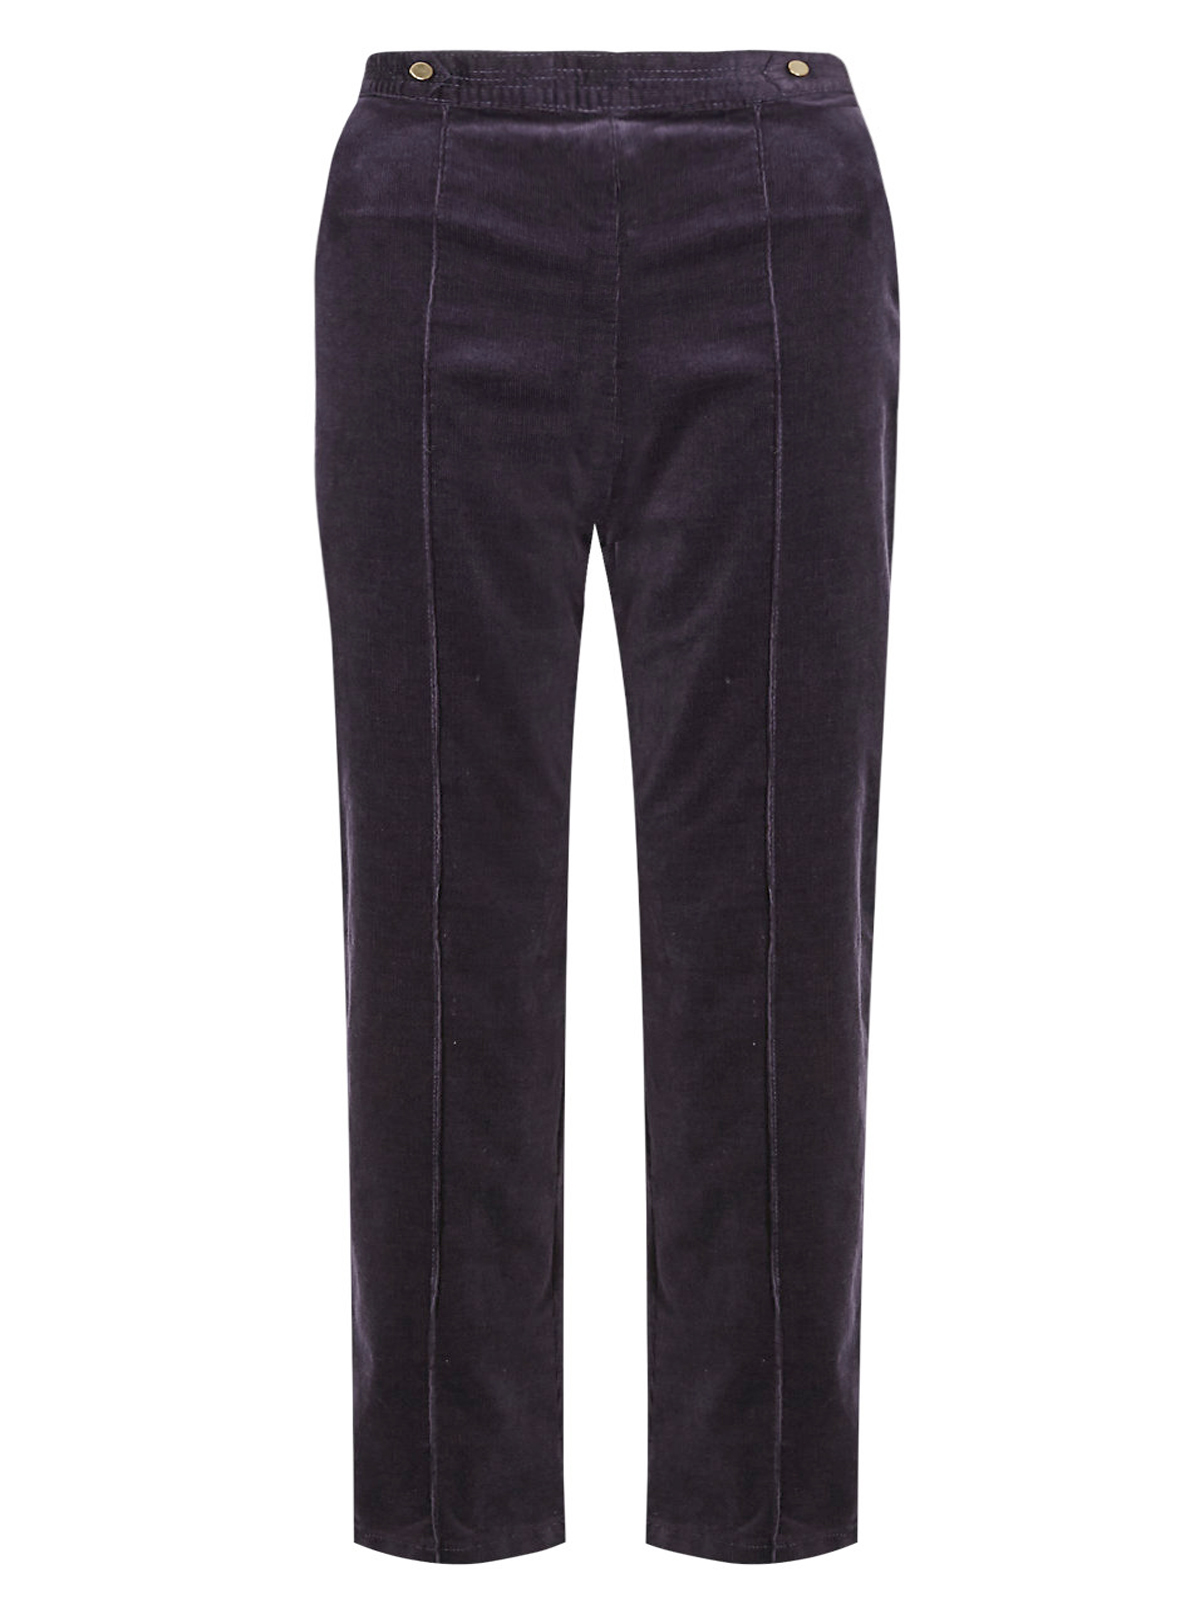 Marks and Spencer - - M&5 PLUM Cotton Rich Corduroy Pull On Straight ...